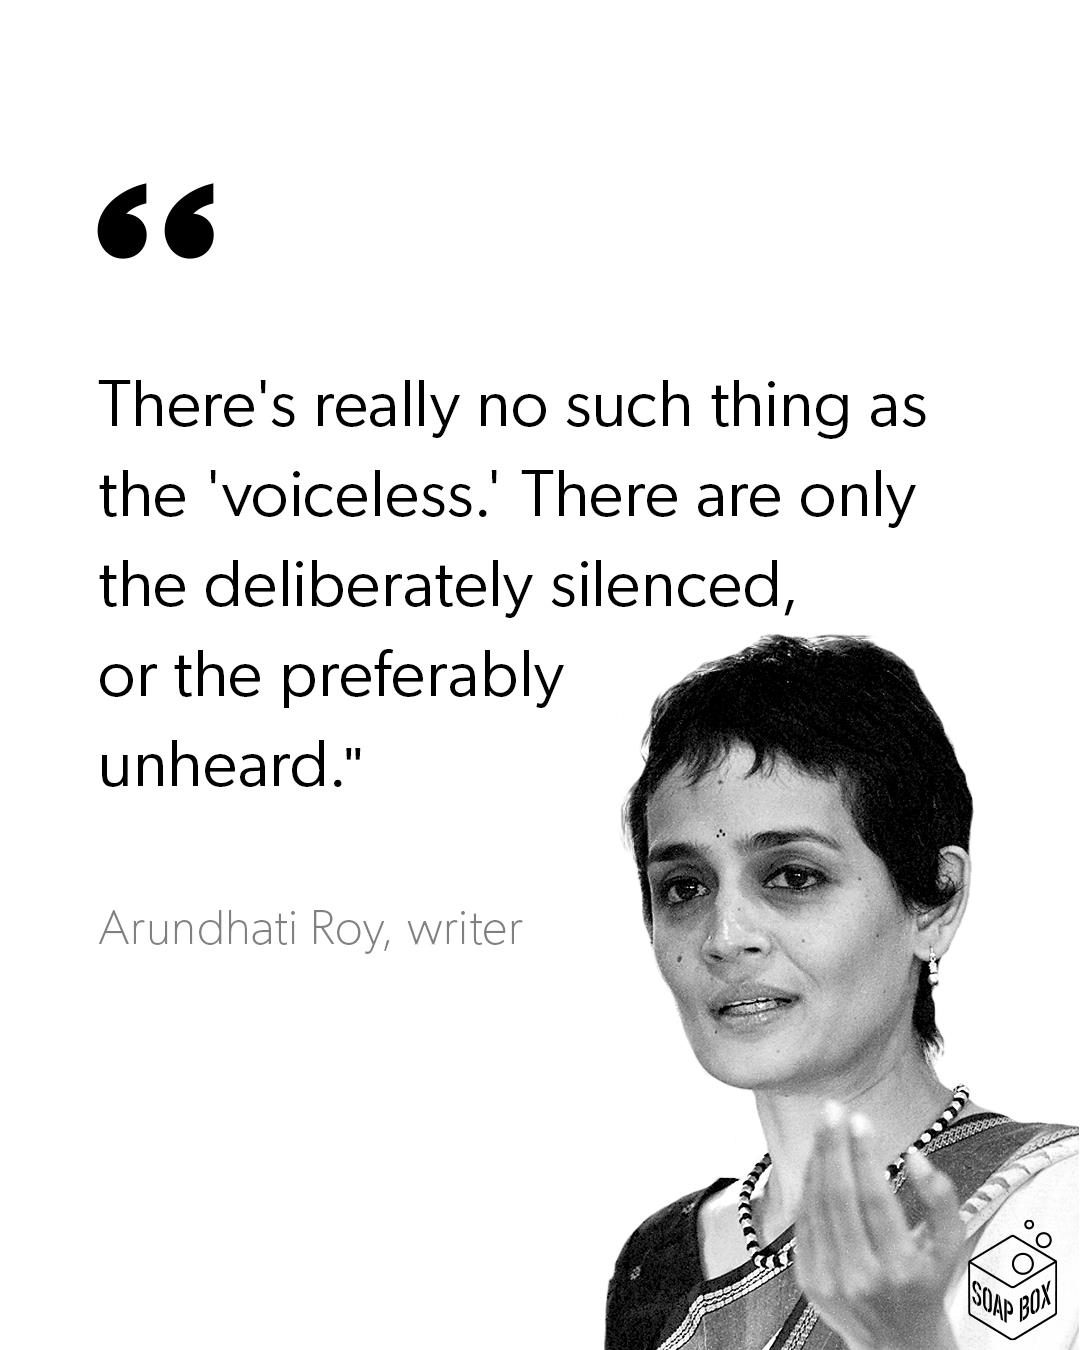 Arundhati Roy: The deliberately silenced and preferably unheard.